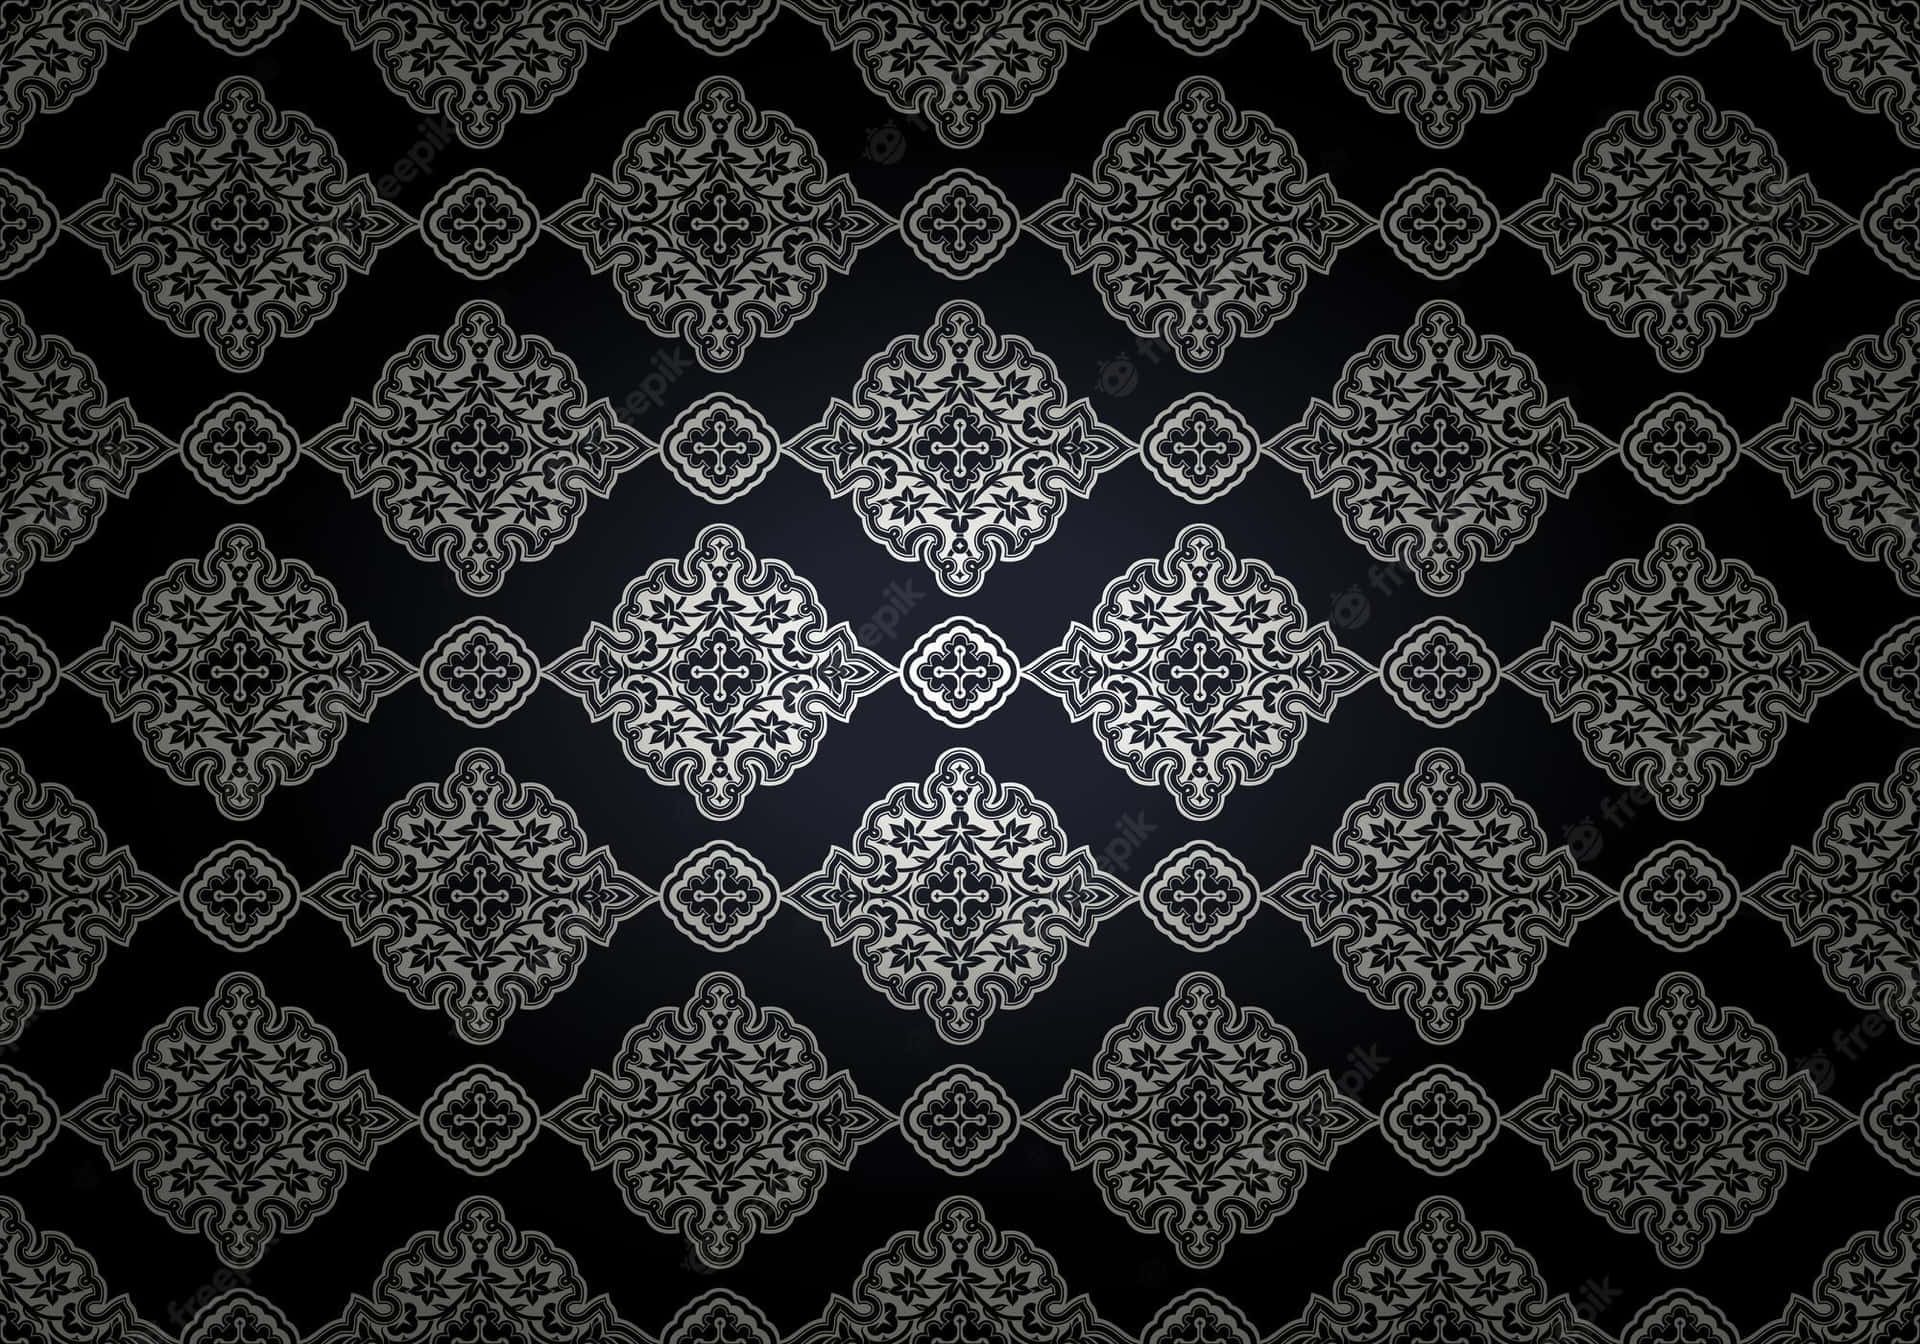 fancy backgrounds black and white